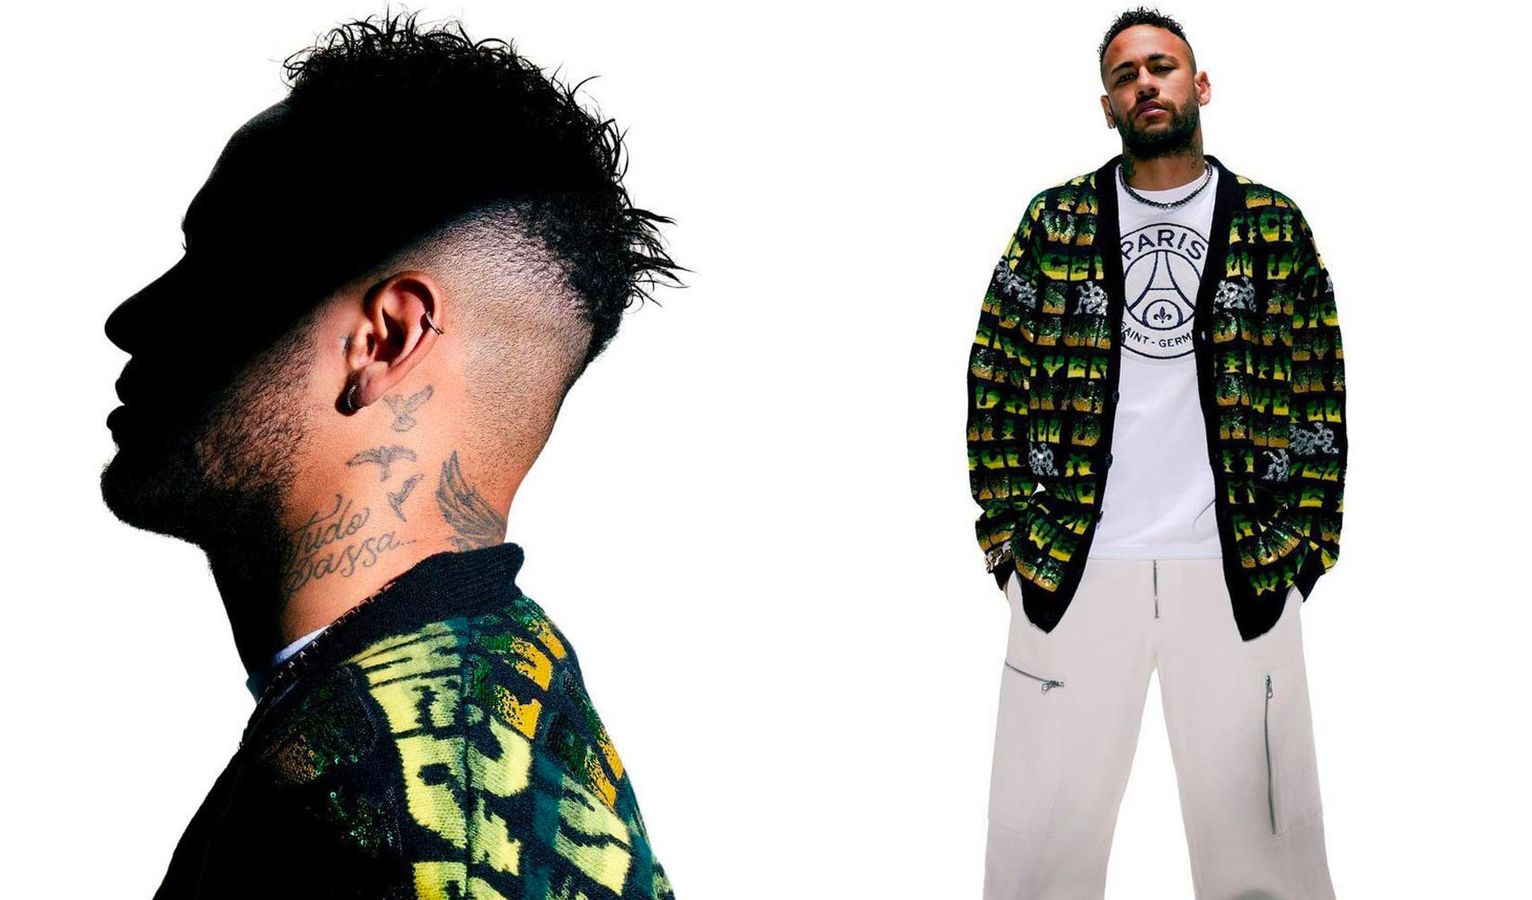 Paris Saint-Germain x GOAT People of Paris collection image of Neymar wearing a white PSG tee and a black, green, and yellow knitted jumper.